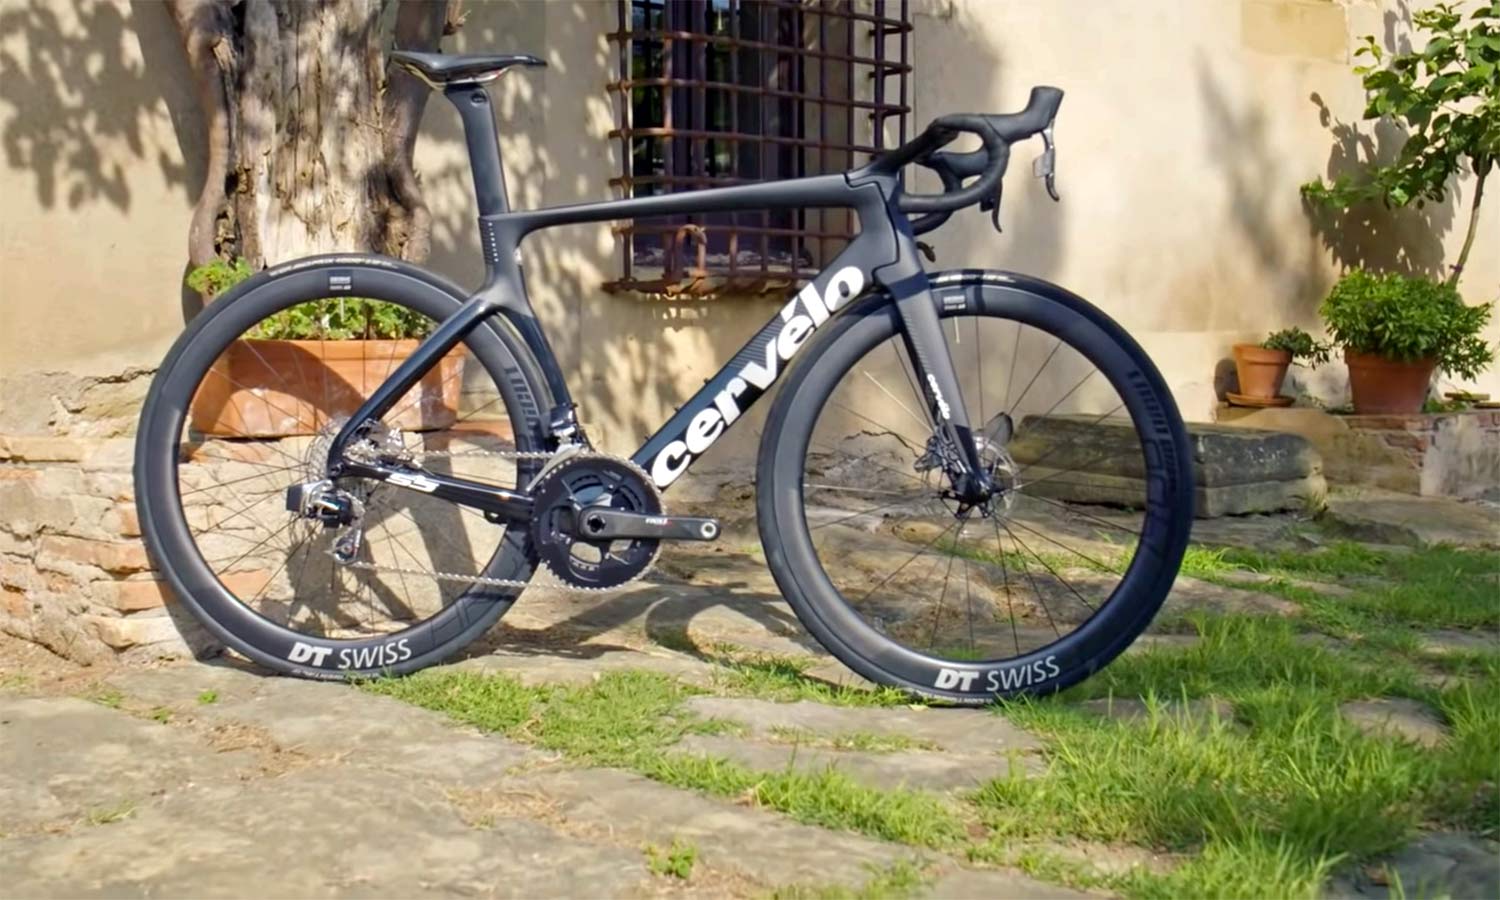 The Cervelo S5 – A Stylish Road Bike With Excellent Suspension